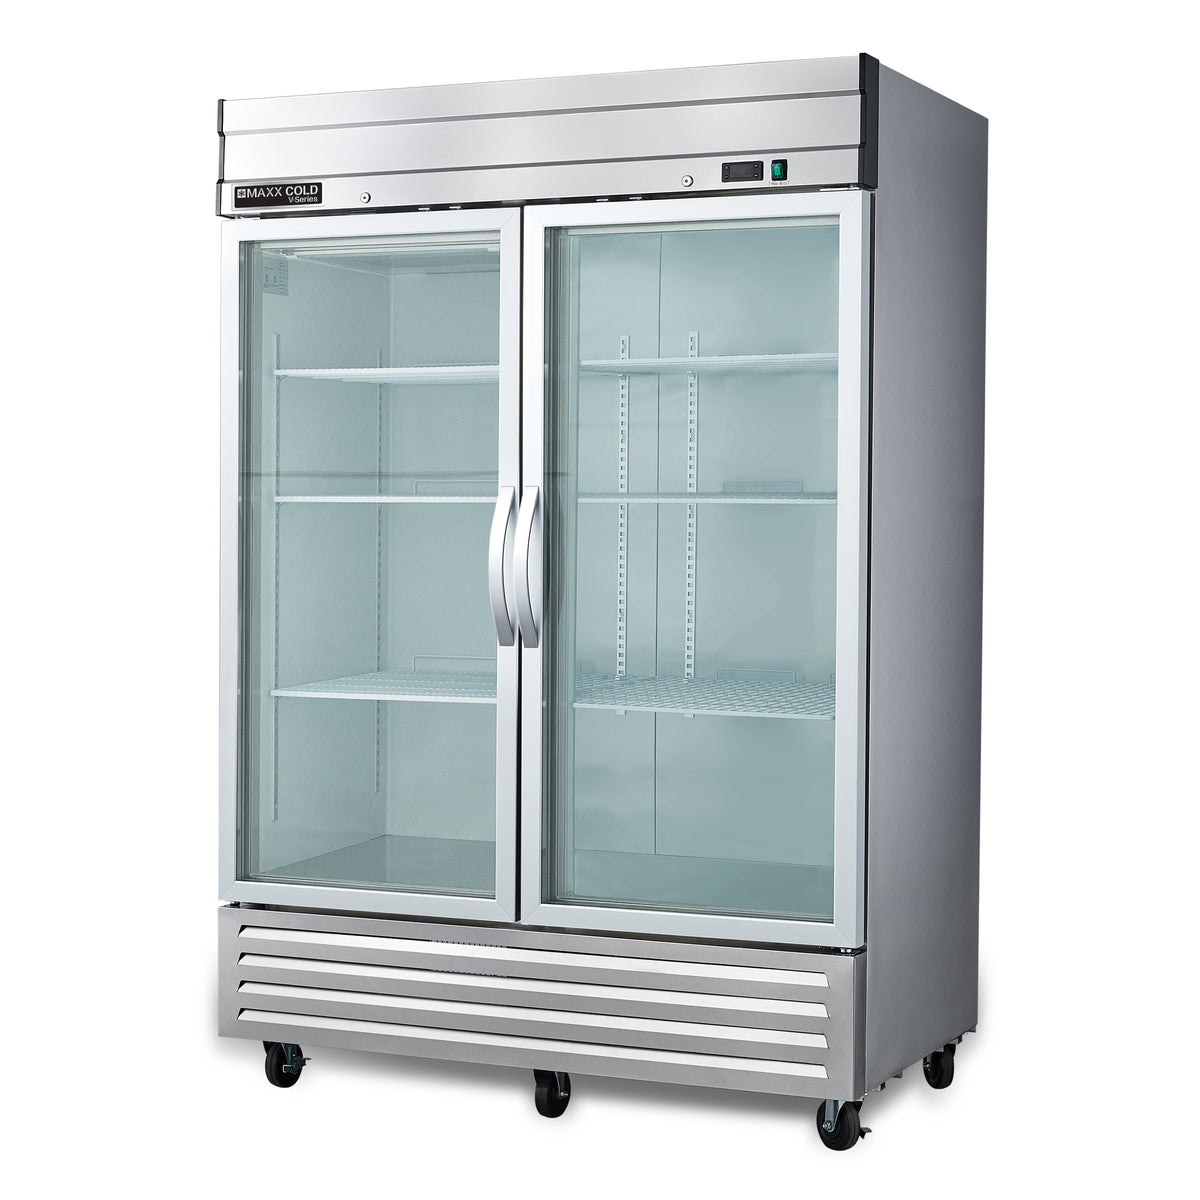 Maxx Cold MVR-49GD V-Series 2 Glass Door Reach-In Refrigerator, Bottom Mount, 54"W, 42 cu. ft. Storage Capacity, in Stainless Steel (MVR-49GDHC)